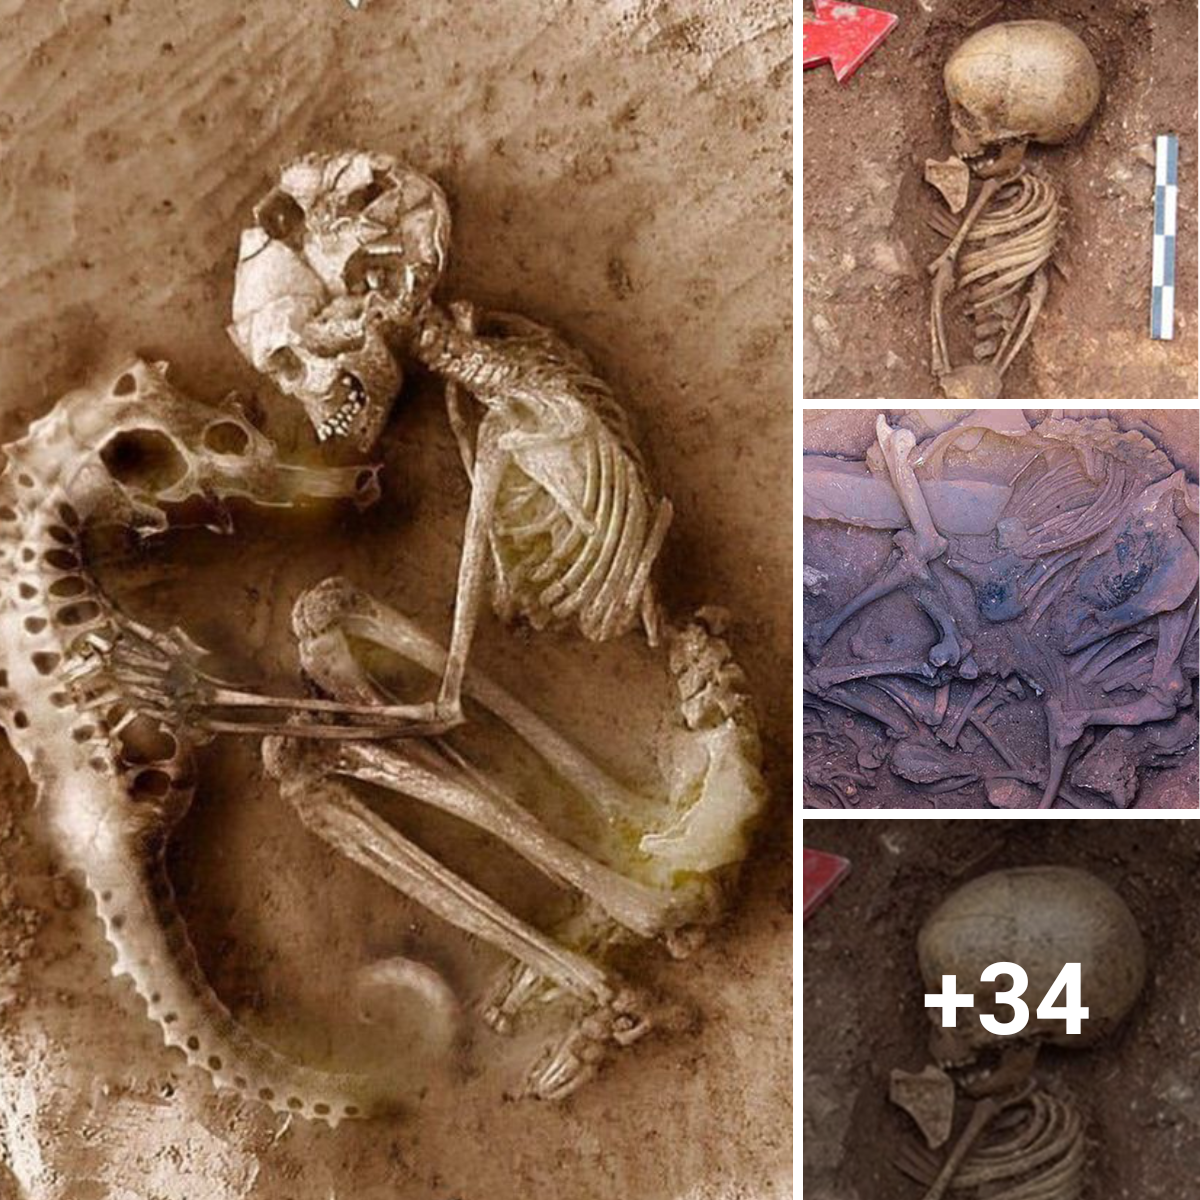 Mysterious Burial: Archaeologists Discover Baby and Seahorse Skeletons Entwined in an Ancient Grave